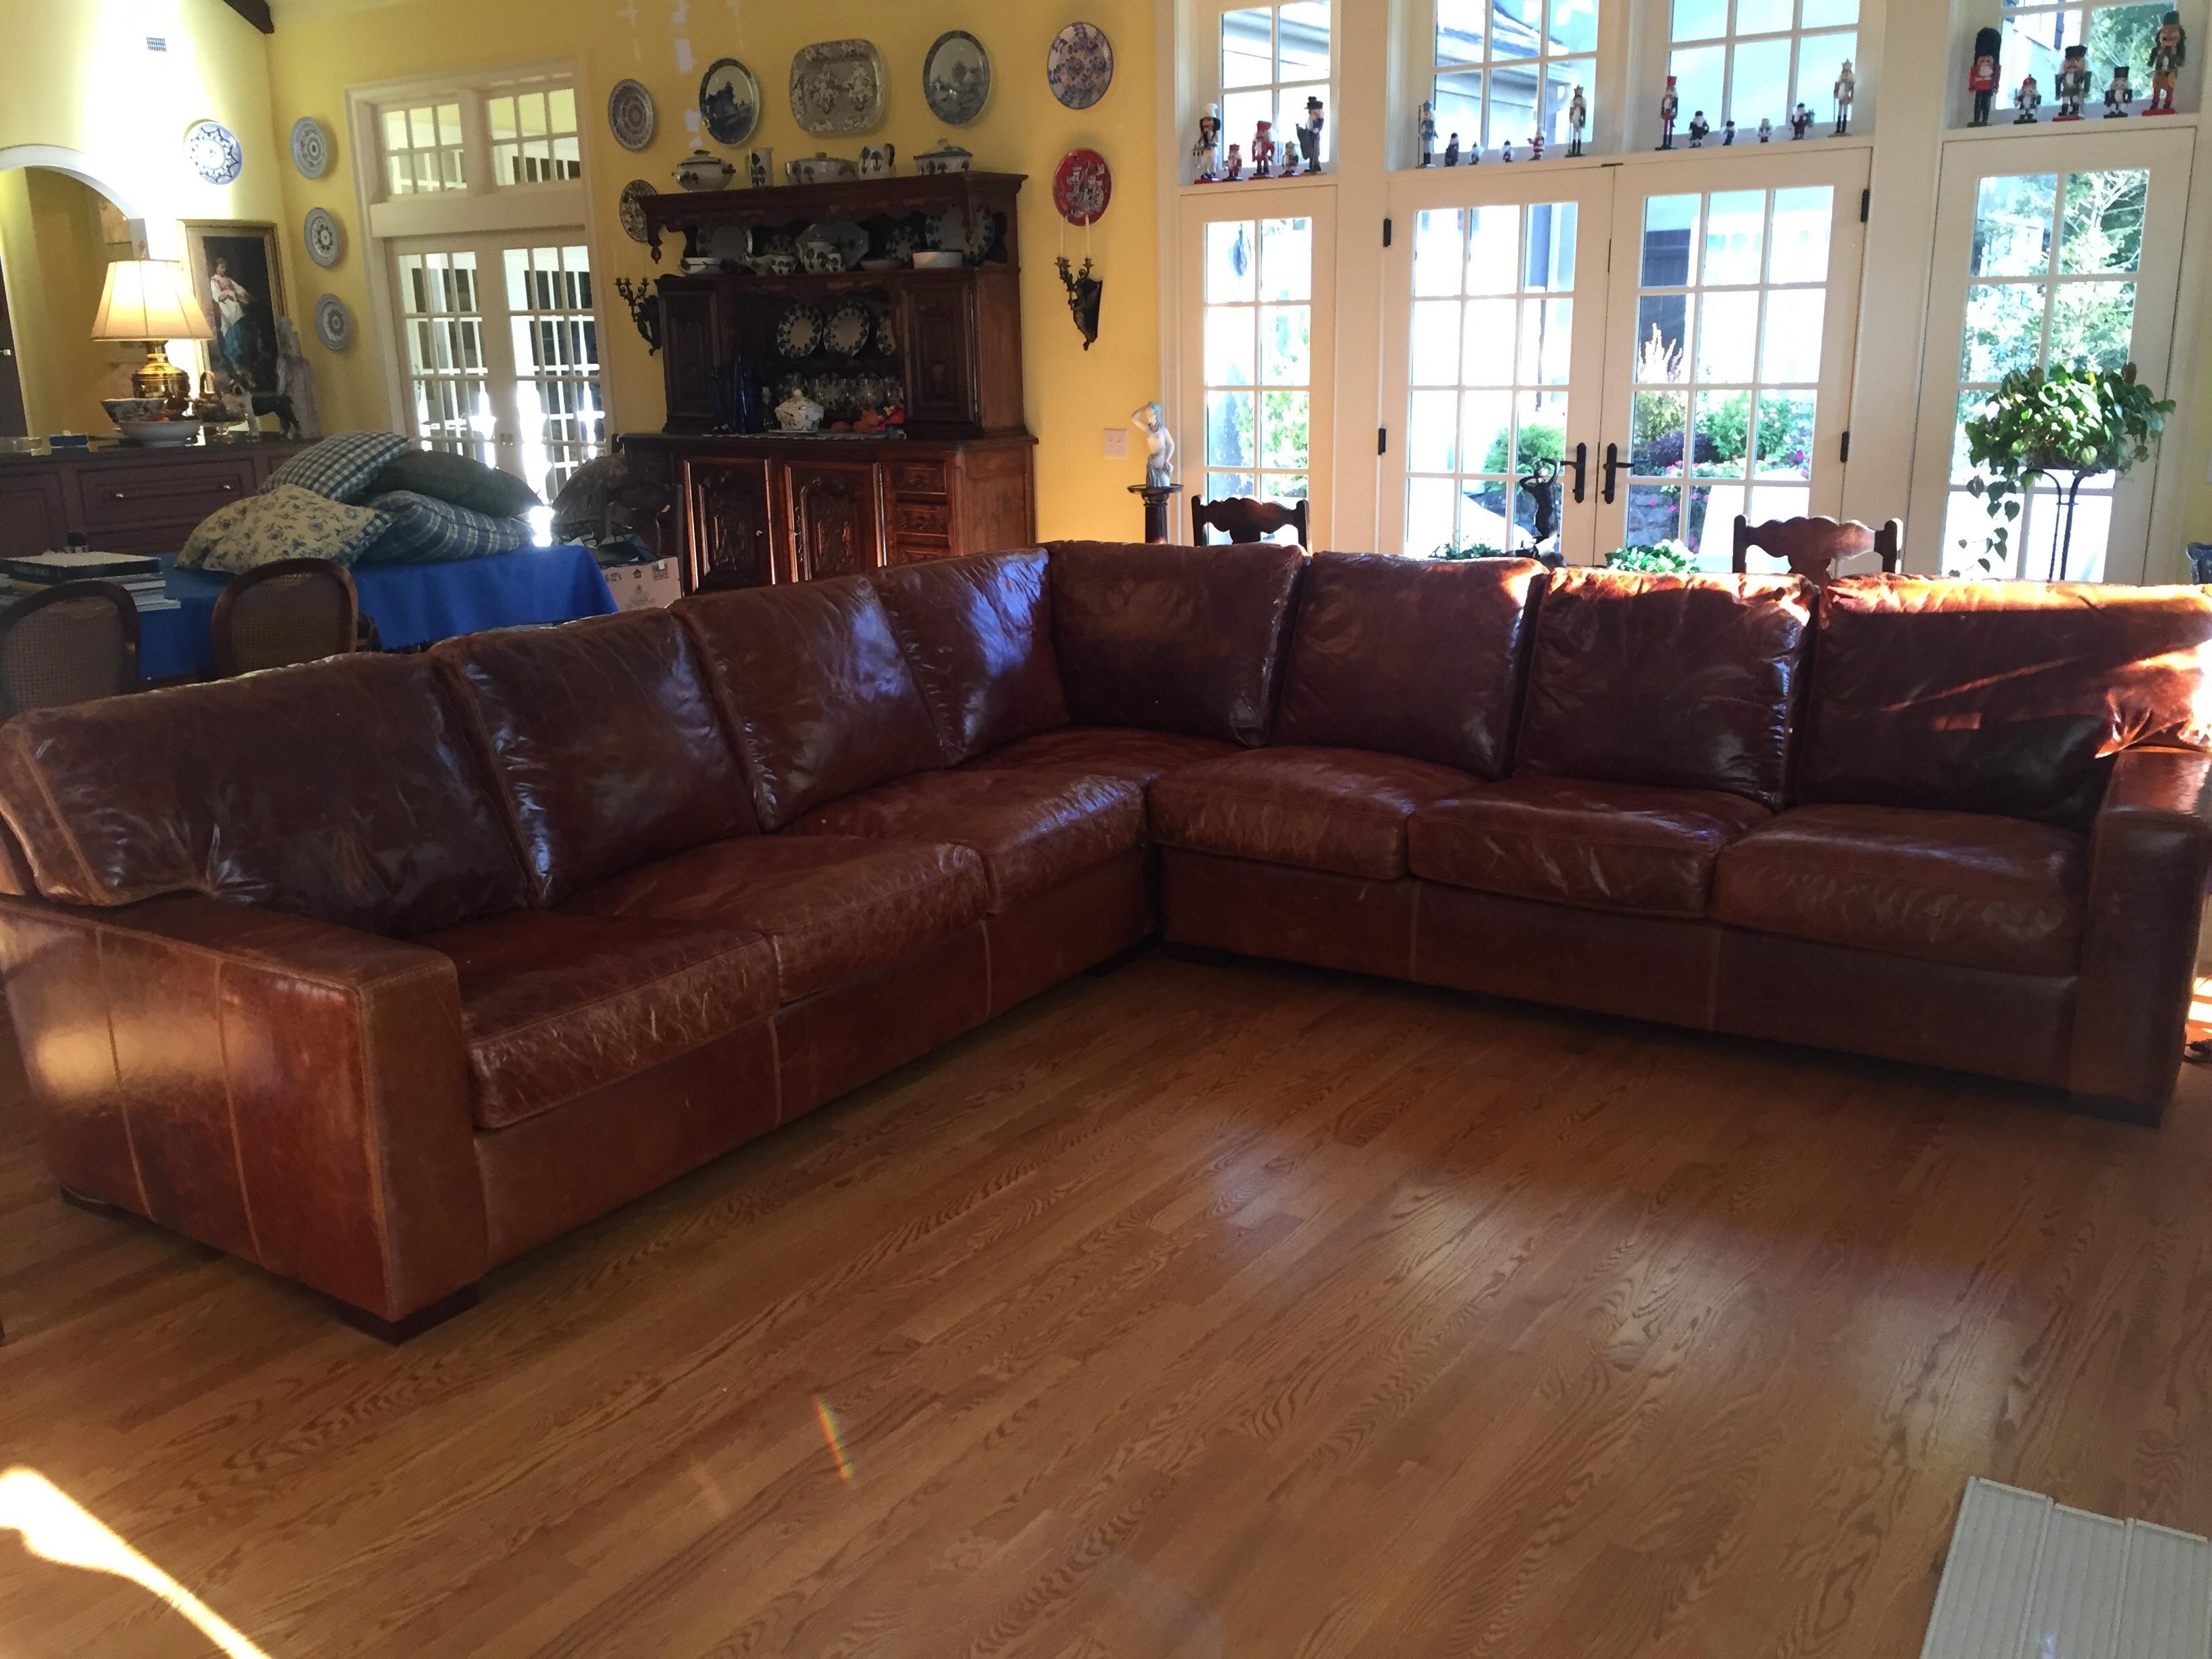 All leather sectional in three parts American made by American Leather Co. two sections are 84 inches long with a corner section of 41 by 41 inches. The total length is 125 inches on each side. The sections are held together with a locking mechanism